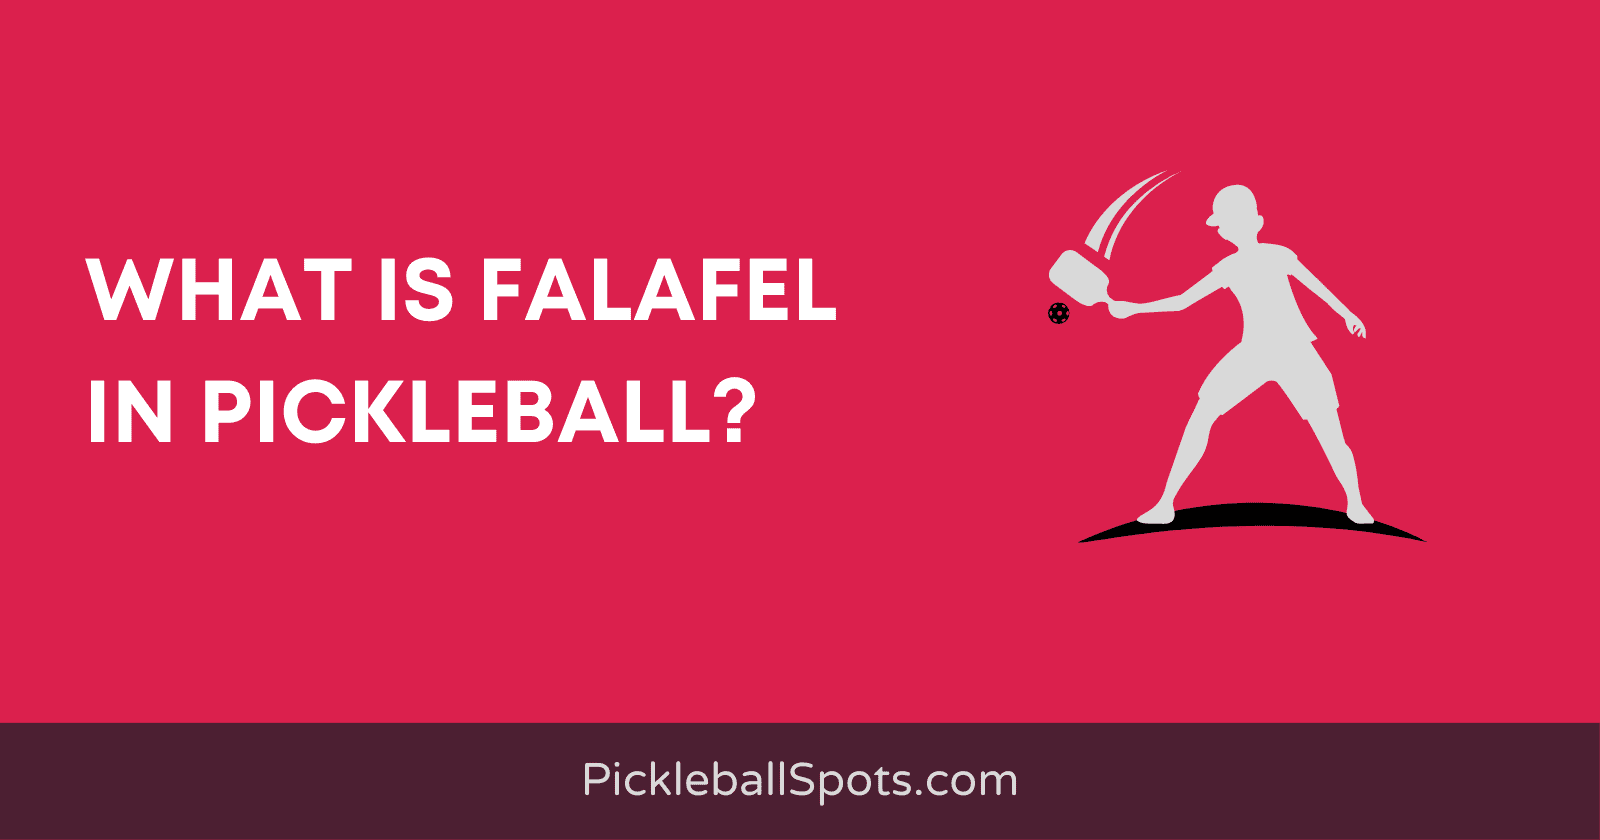 What Is Falafel In Pickleball